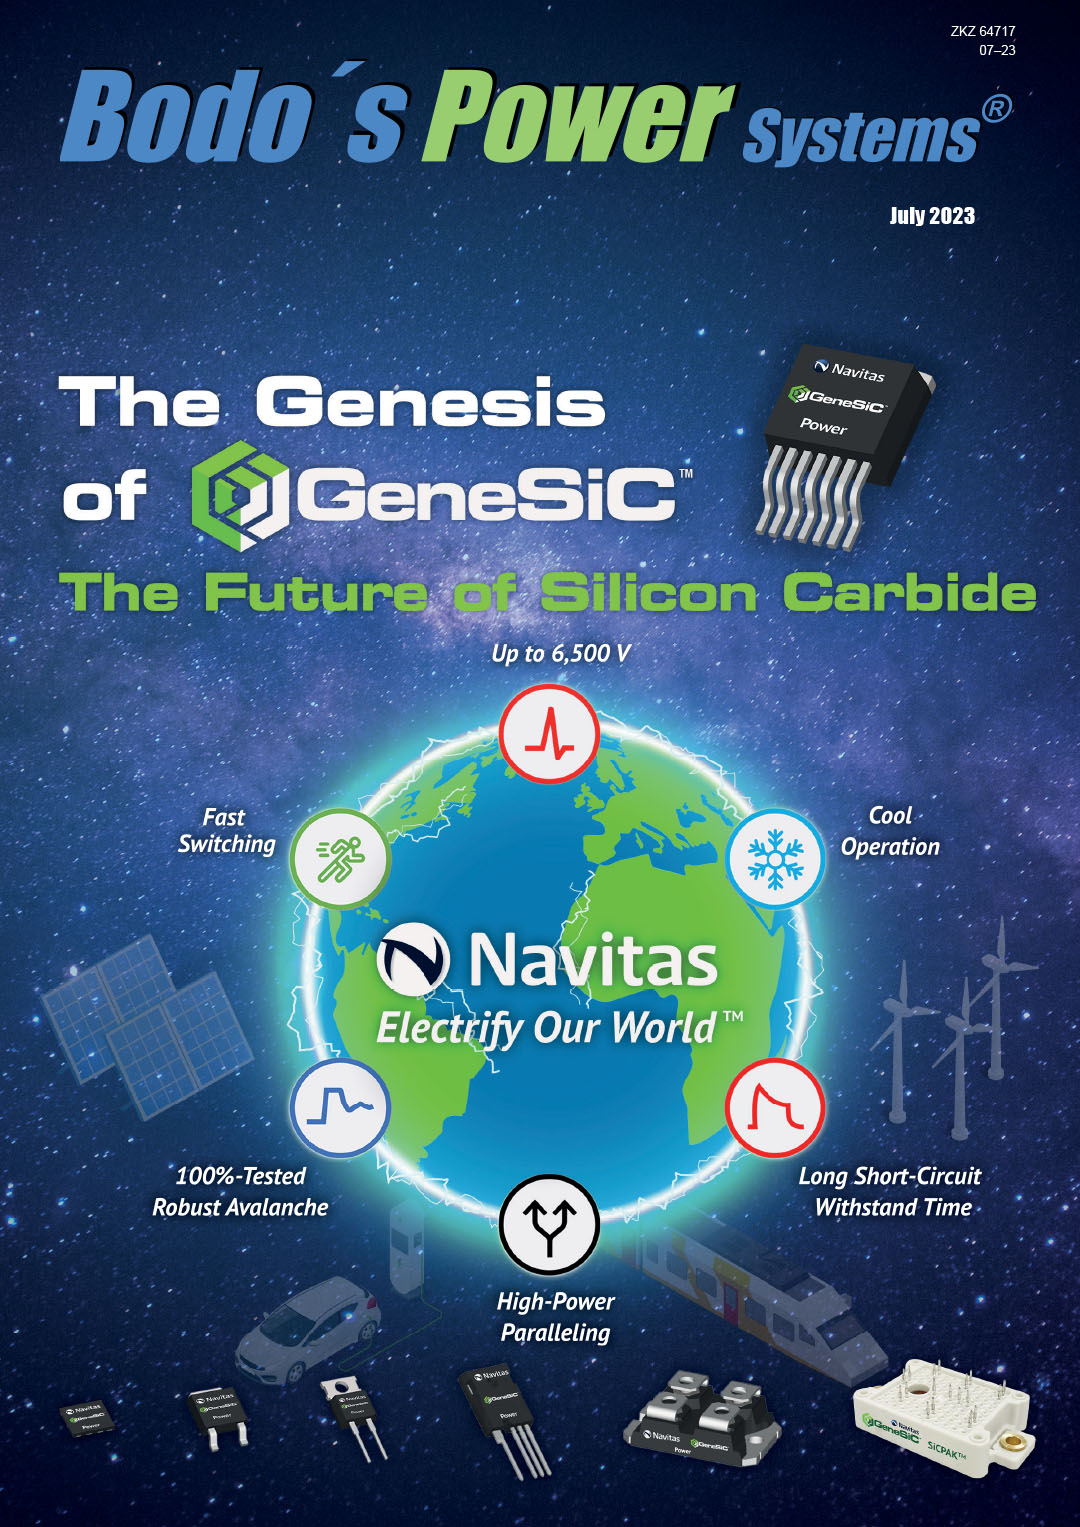 The Genesis of GeneSiC and the Future of Silicon Carbide